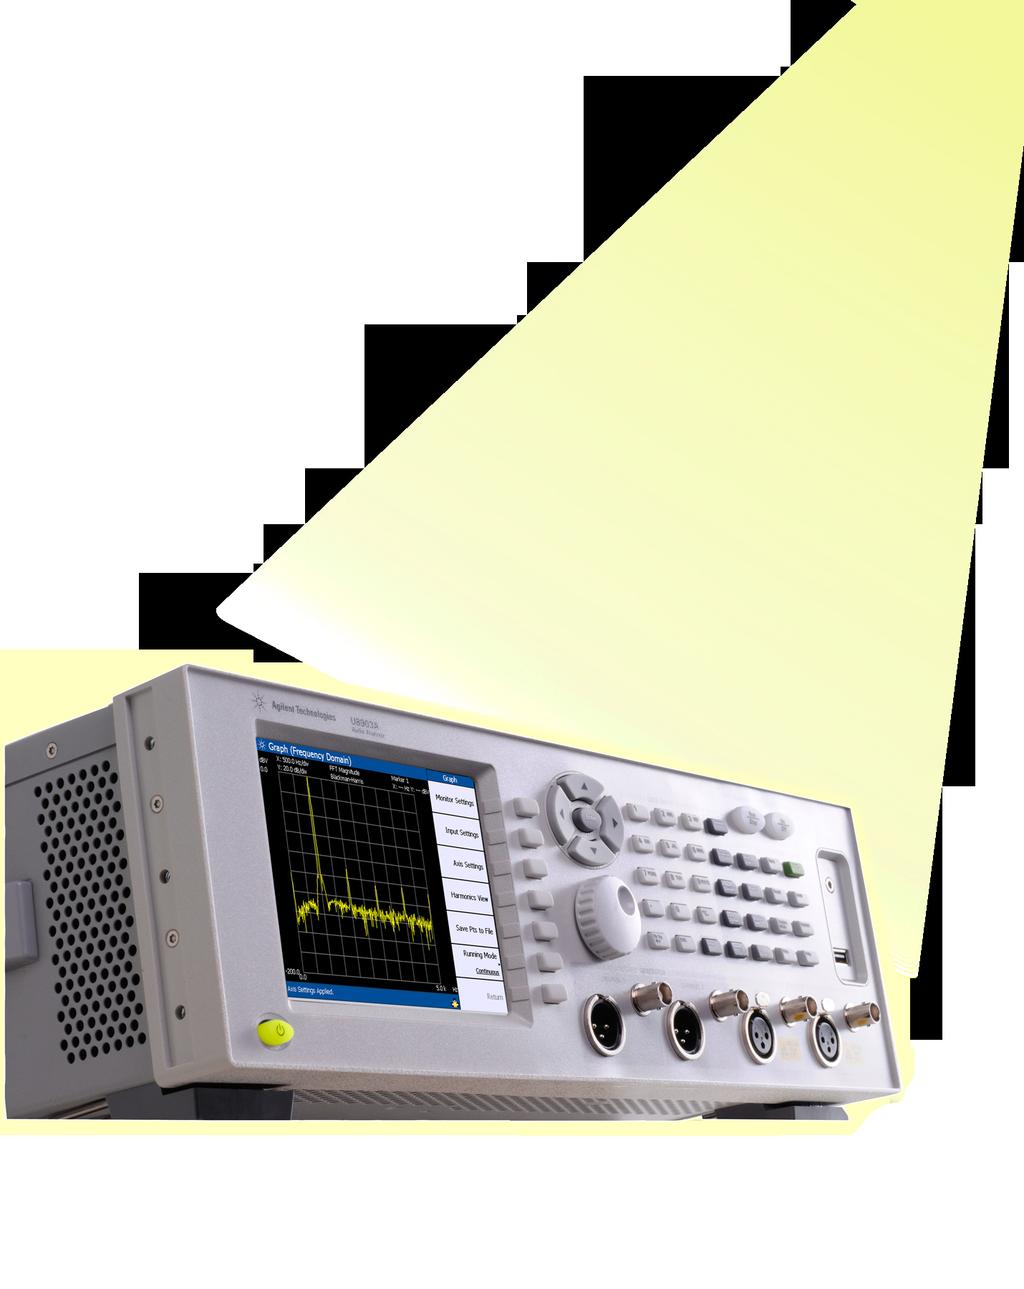 Two-Way Radio Testing with Agilent U8903A Audio Analyzer Application Note Introduction As the two-way radio band gets deregulated,